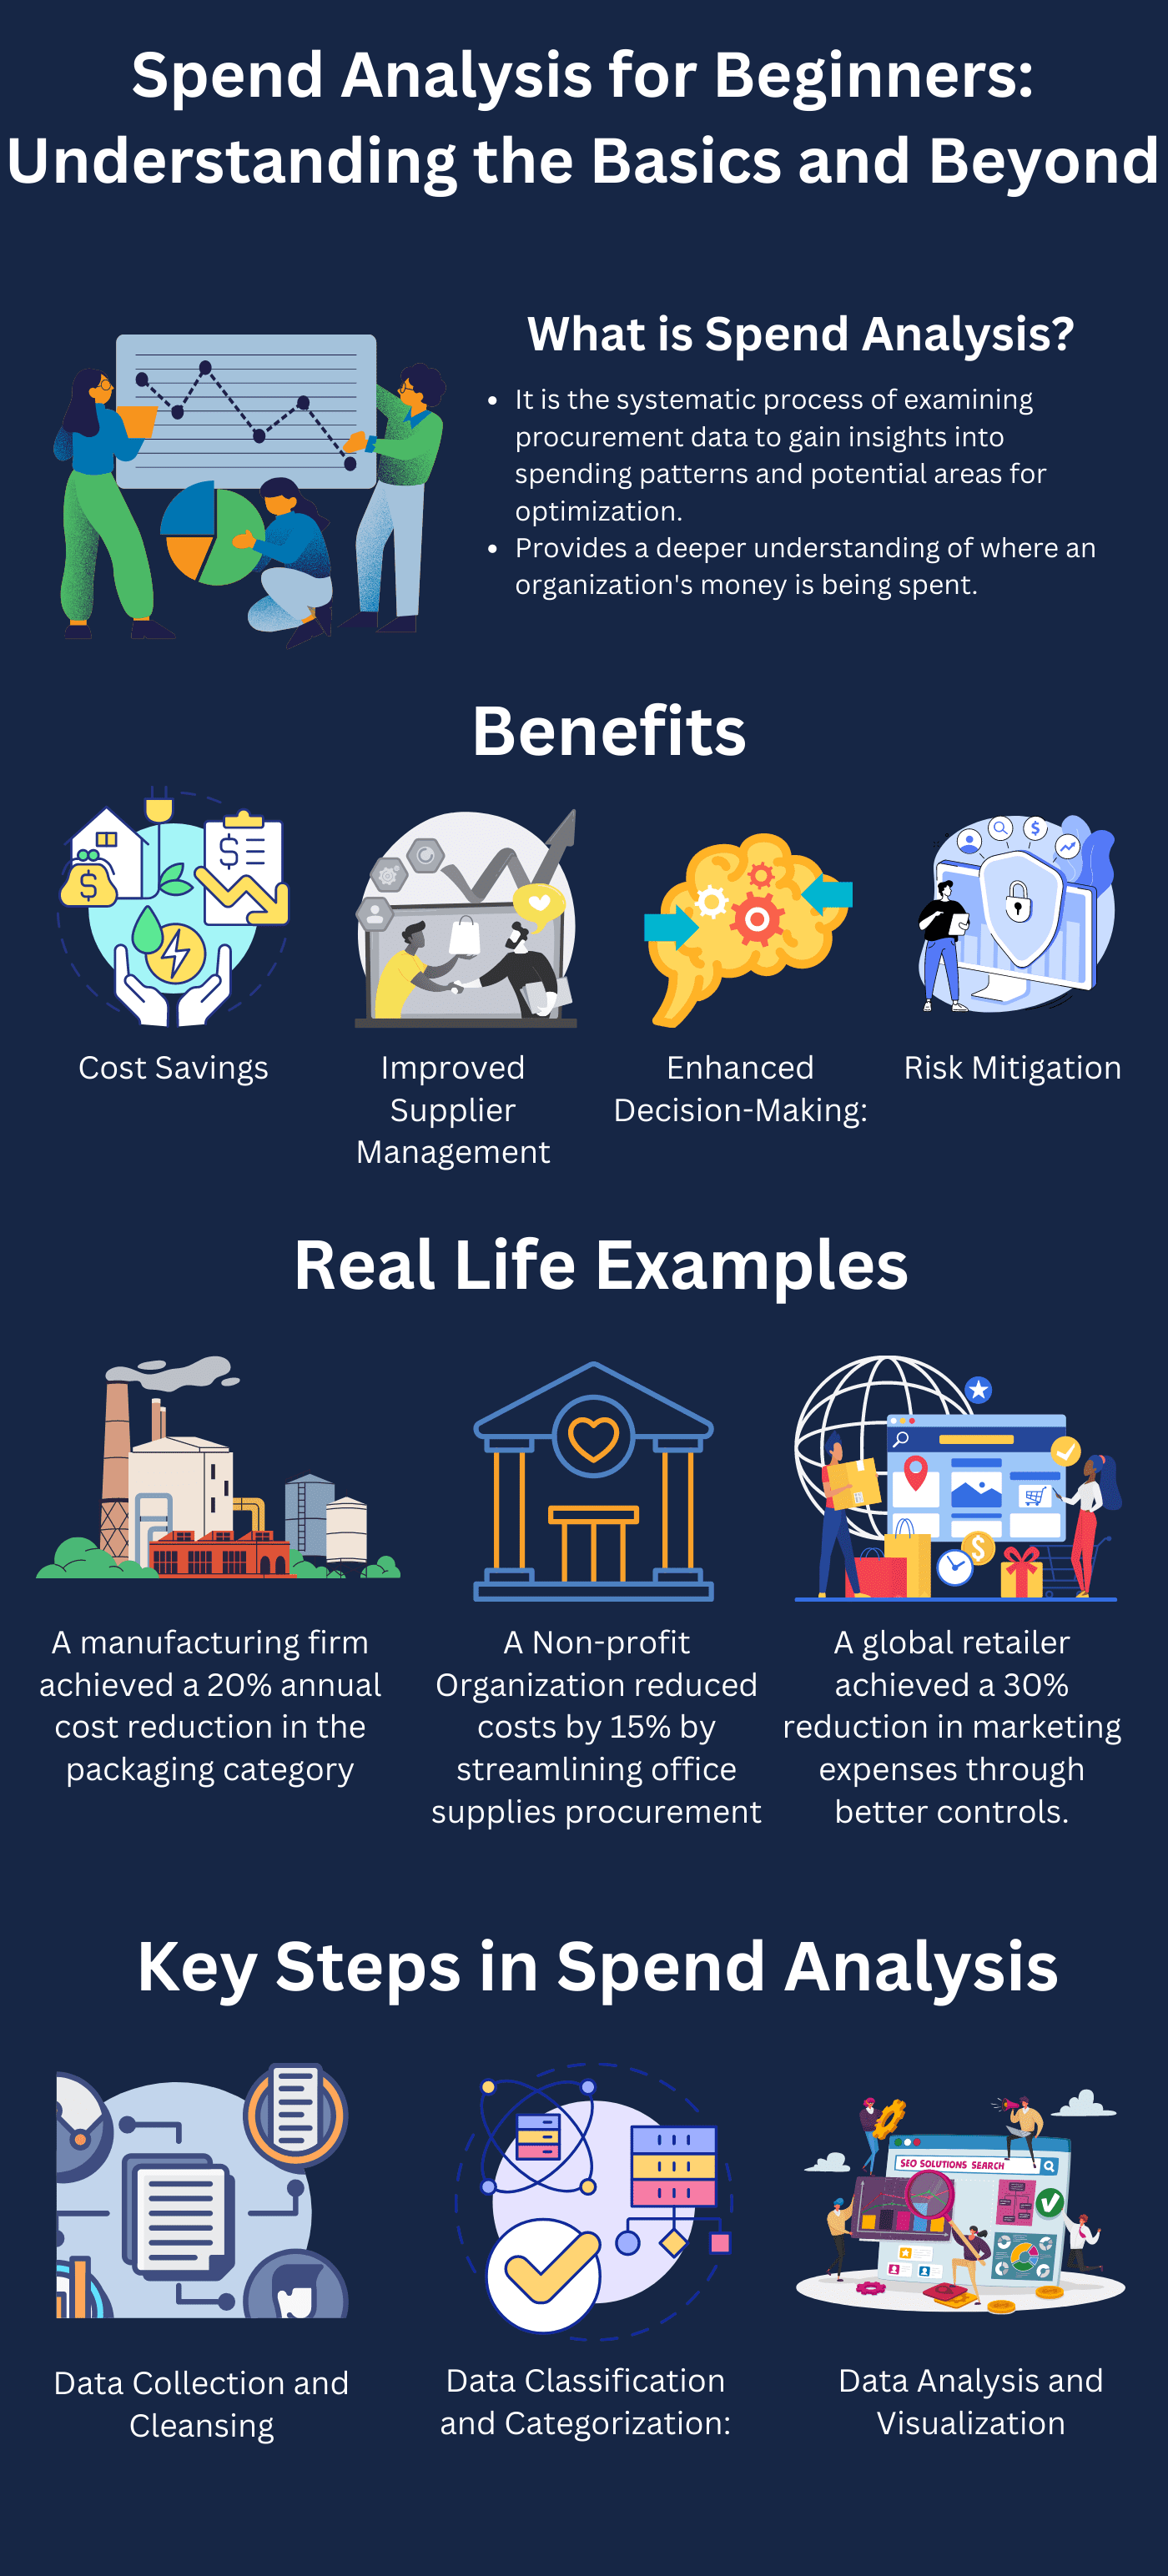 An infographic titled 'Spend Analysis for Beginners: Understanding the Basics and Beyond', explaining the concept of spend analysis, its benefits, real-life examples of successful spend analysis implementations, and the key steps involved in the process.